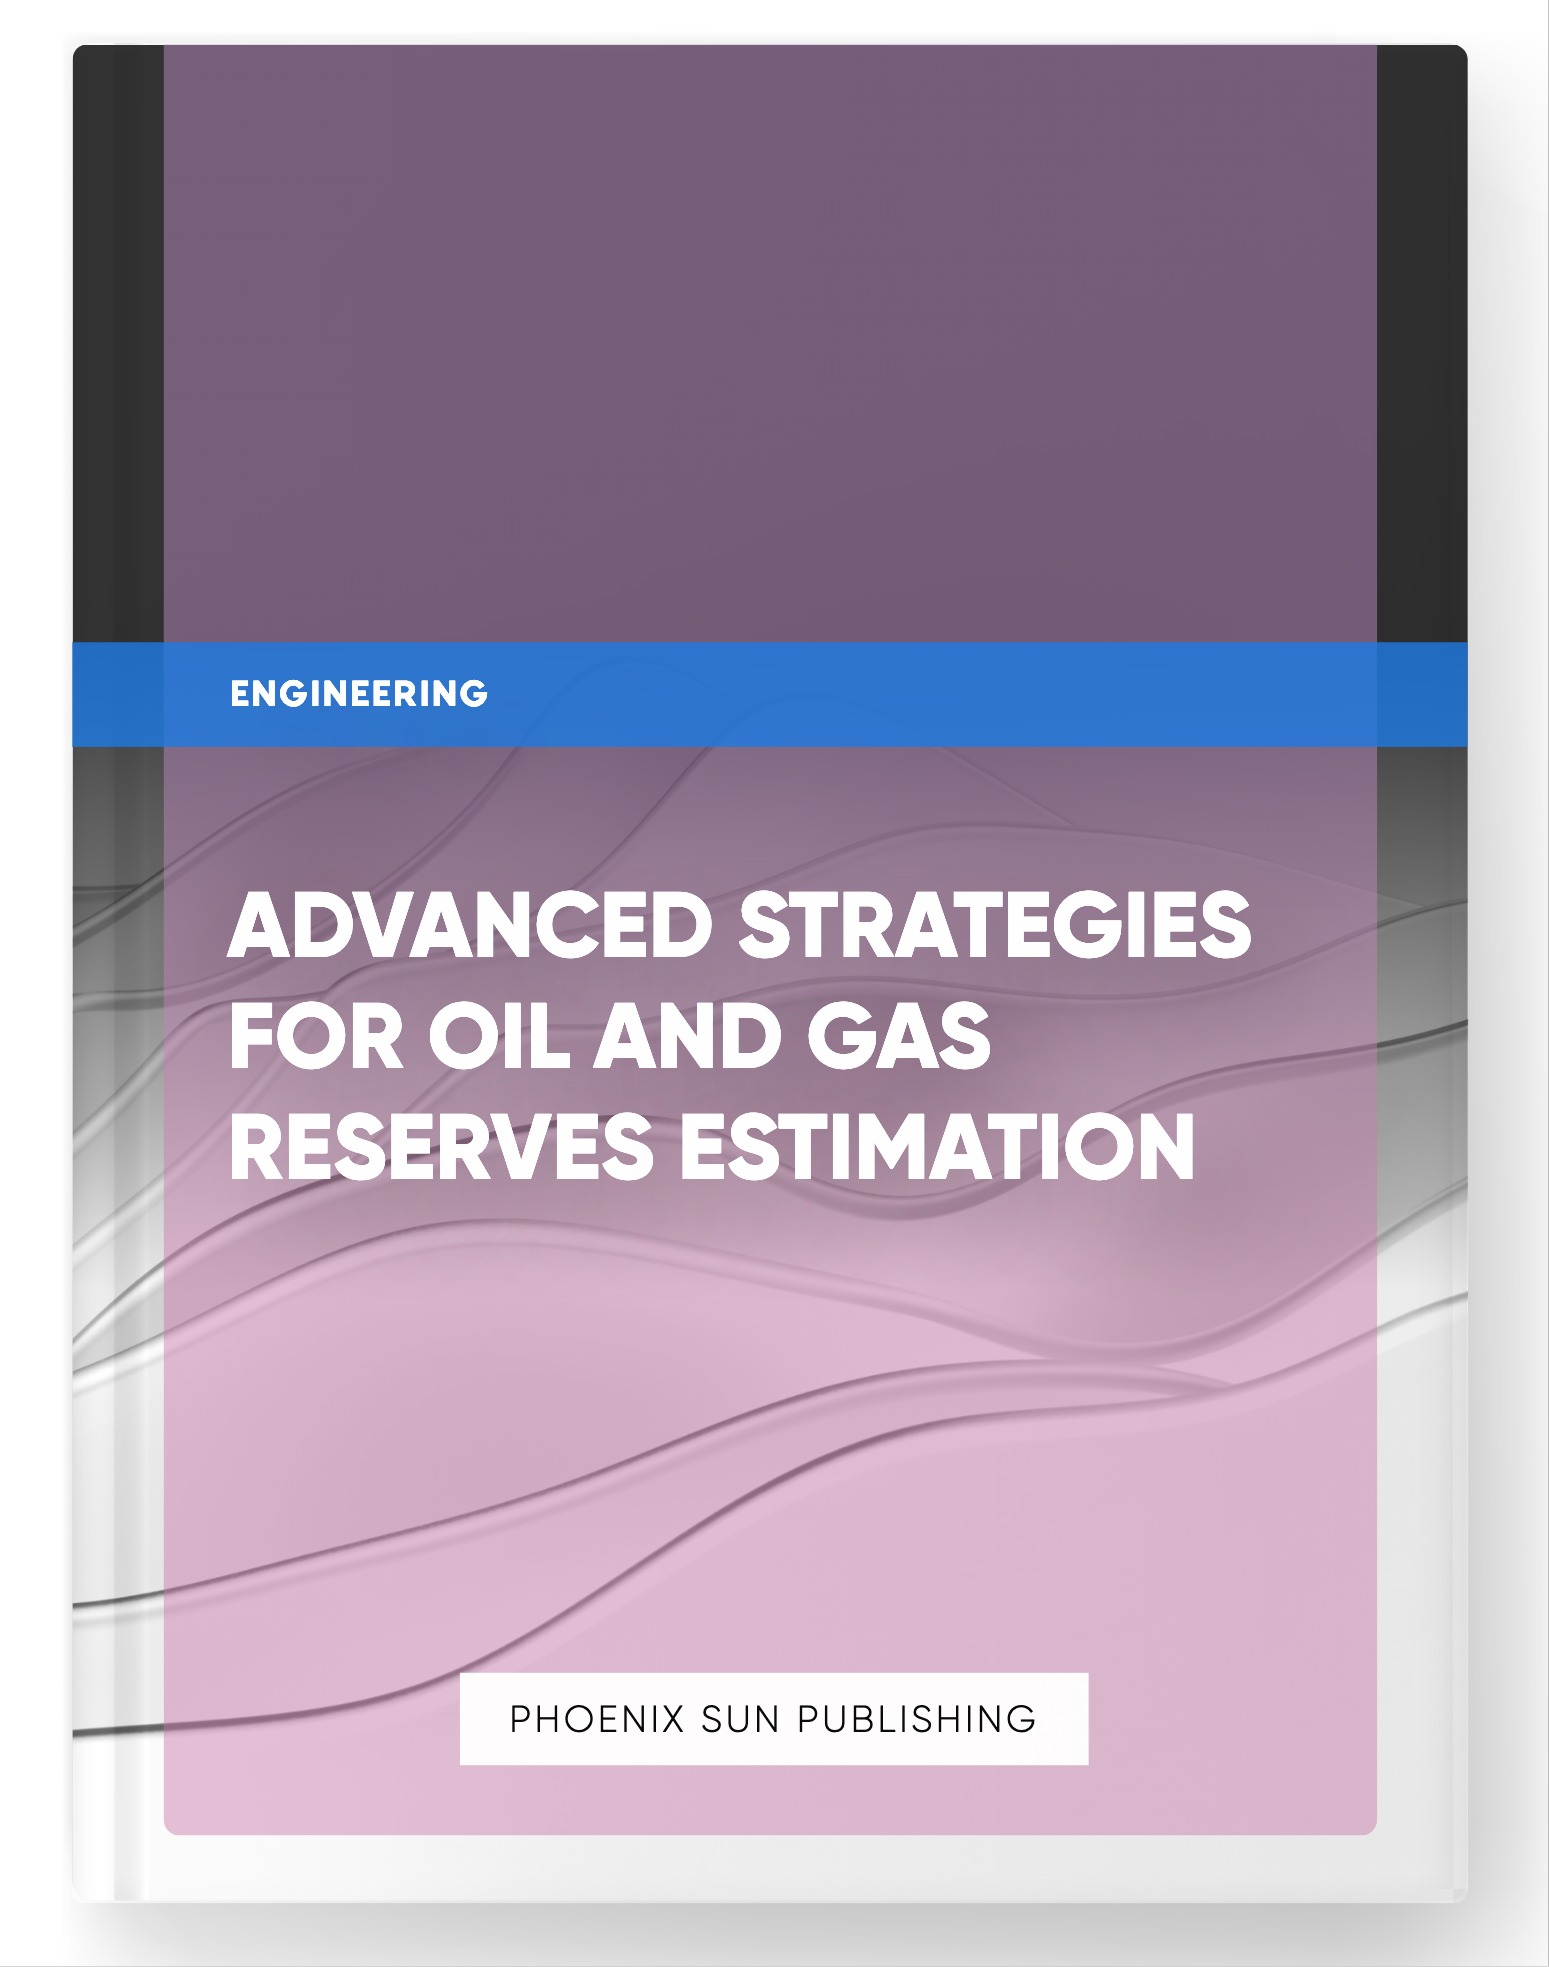 Advanced Strategies for Oil and Gas Reserves Estimation